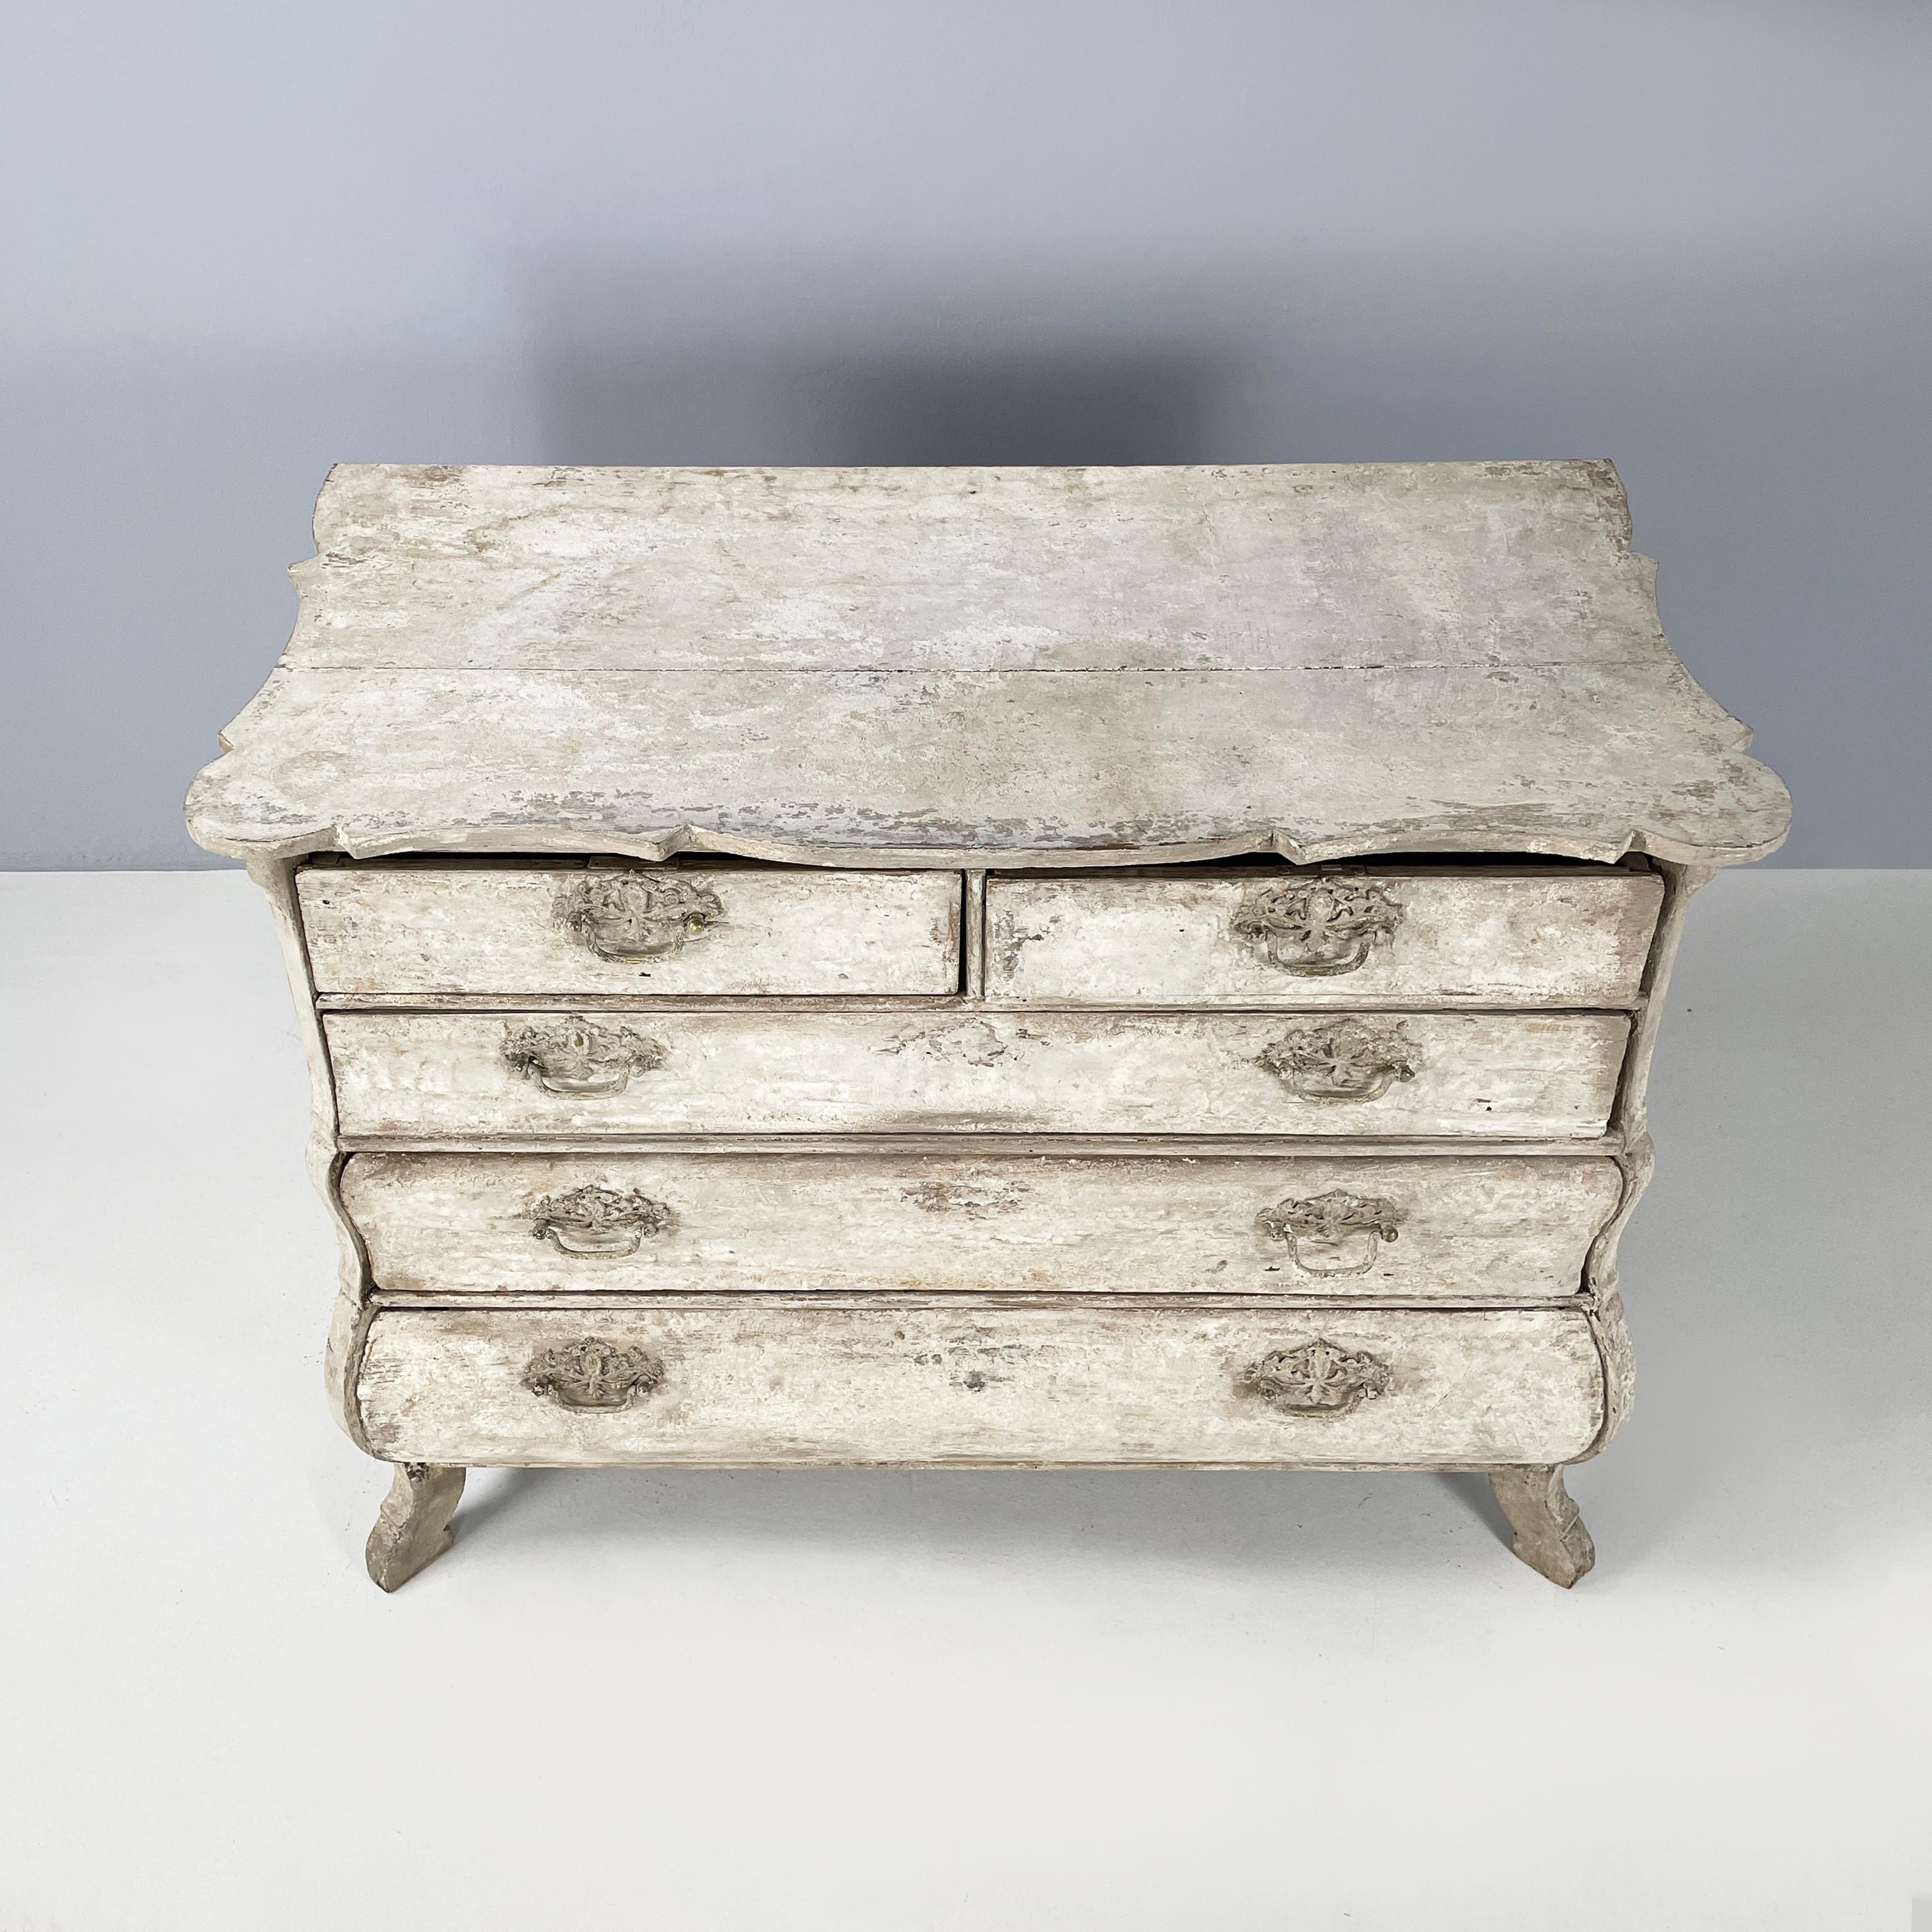 18th Century and Earlier English Wooden chest of drawers with not-uniform white finish, 1700s